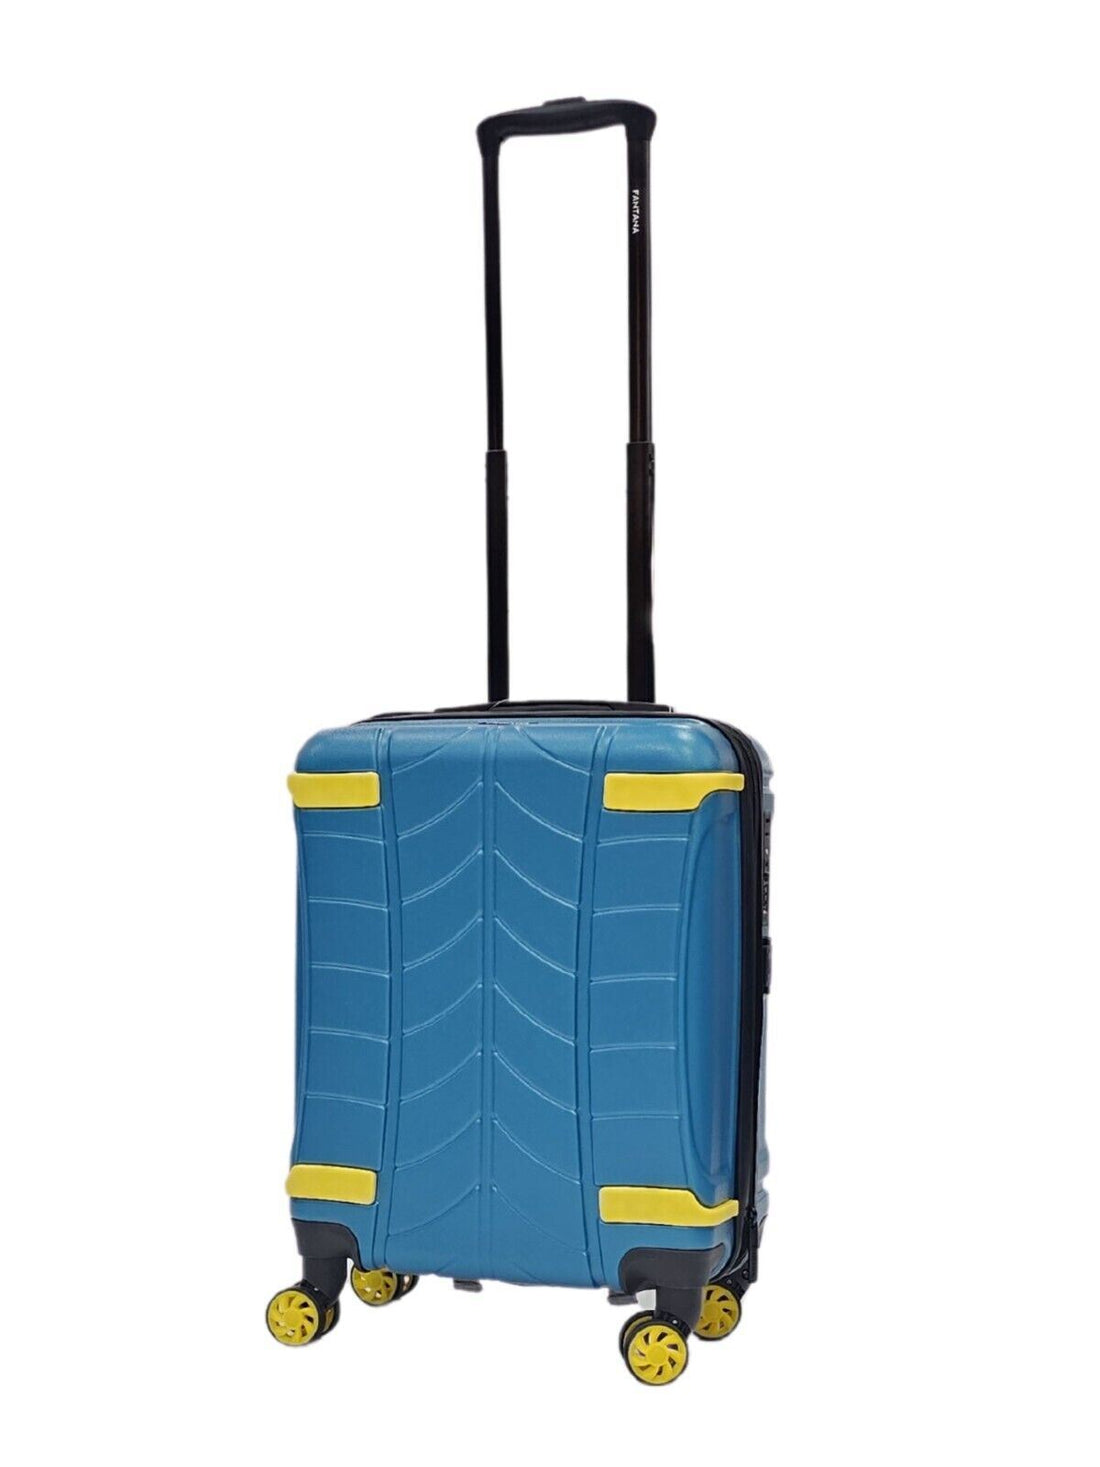 Bynum Cabin Hard Shell Suitcase in Blue